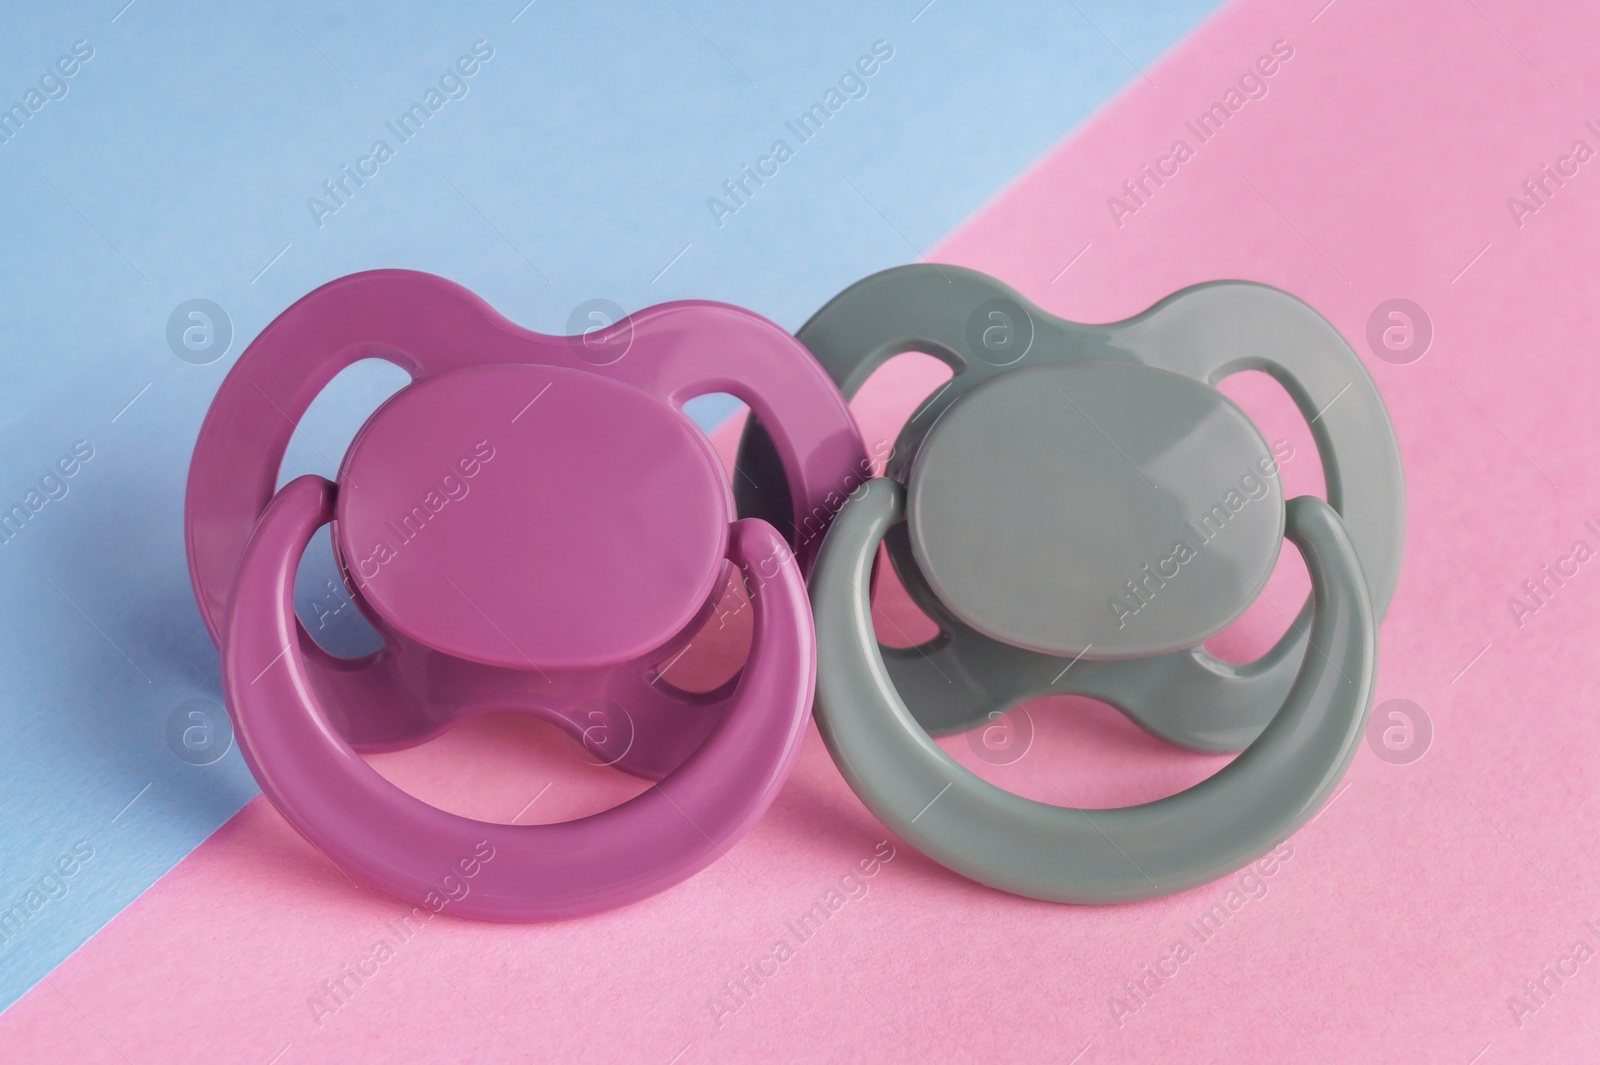 Photo of New baby pacifiers on color background, closeup